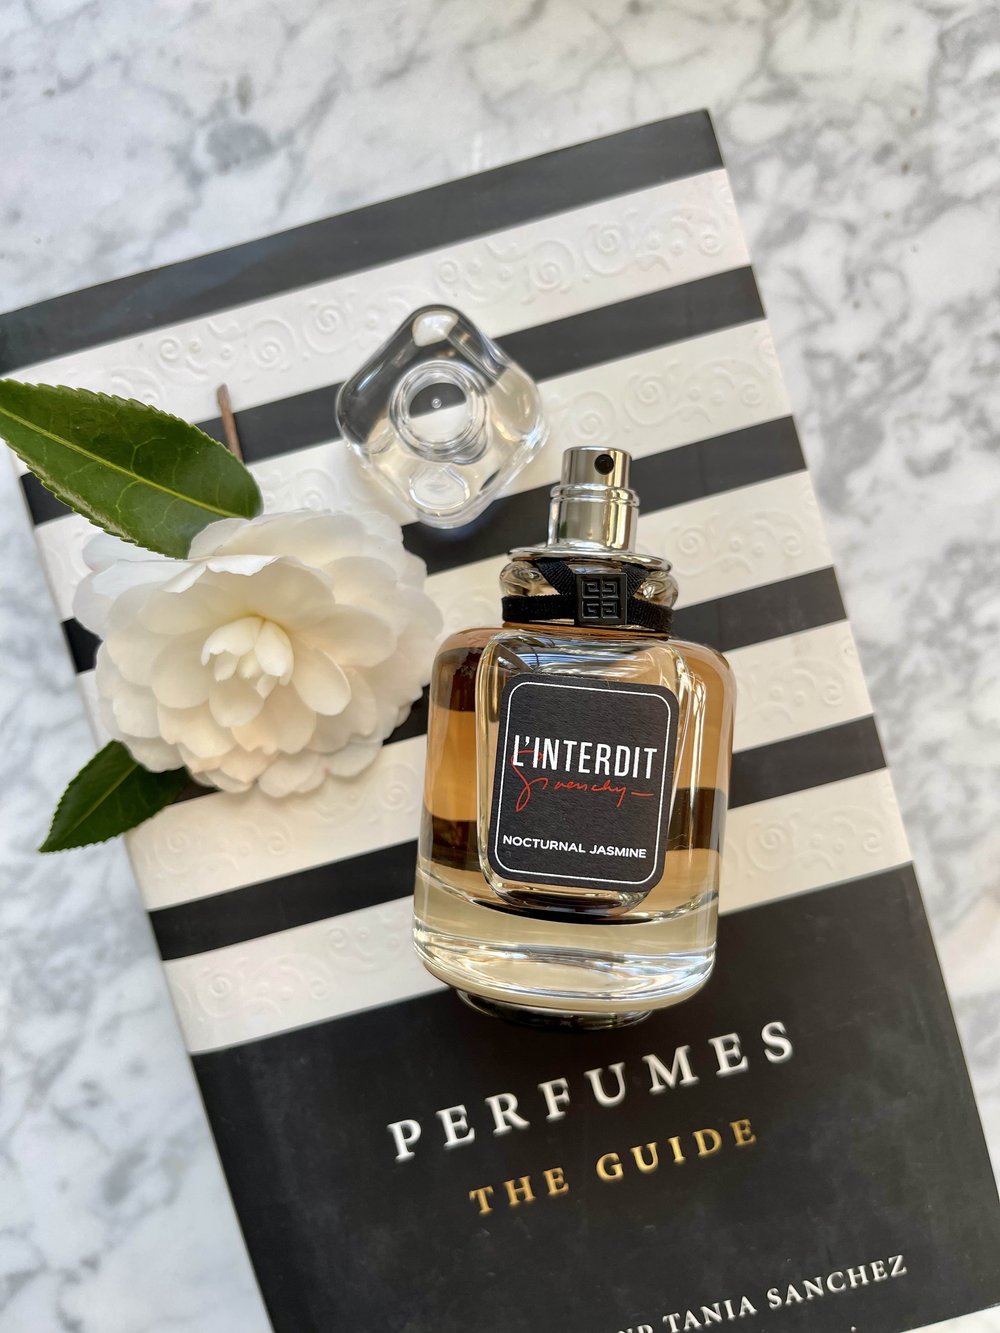 New Givenchy L'Interdit Nocturnal Jasmine limited edtion - BeautyEQ